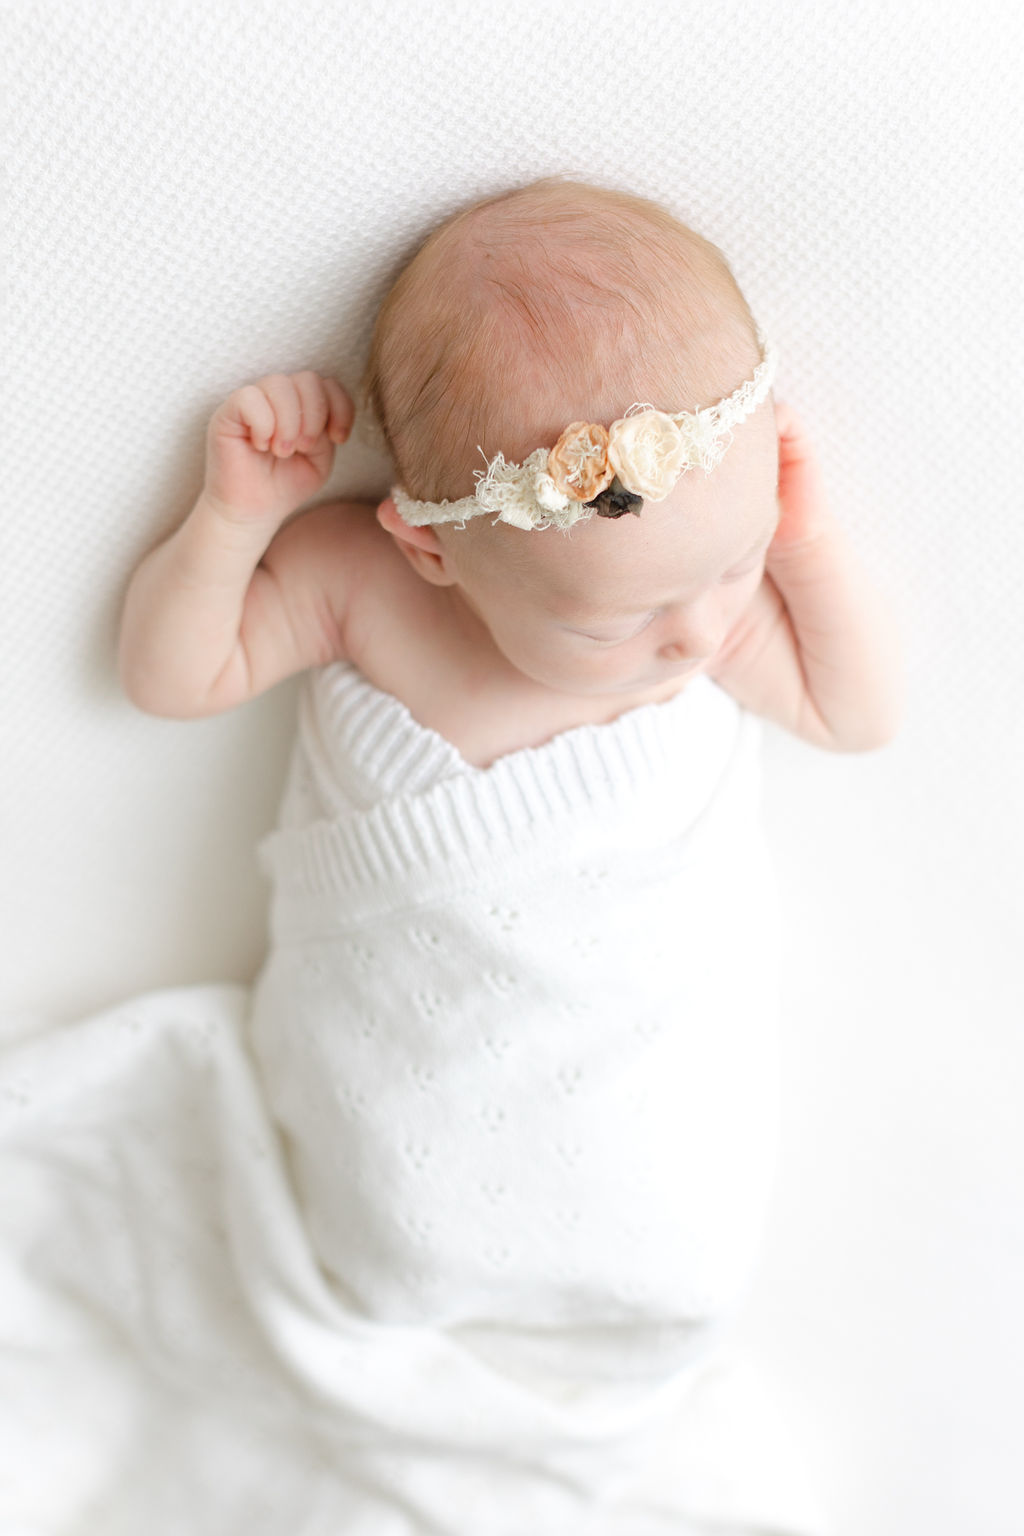 A newborn baby sleeps in a white blanket wearing a floral headband